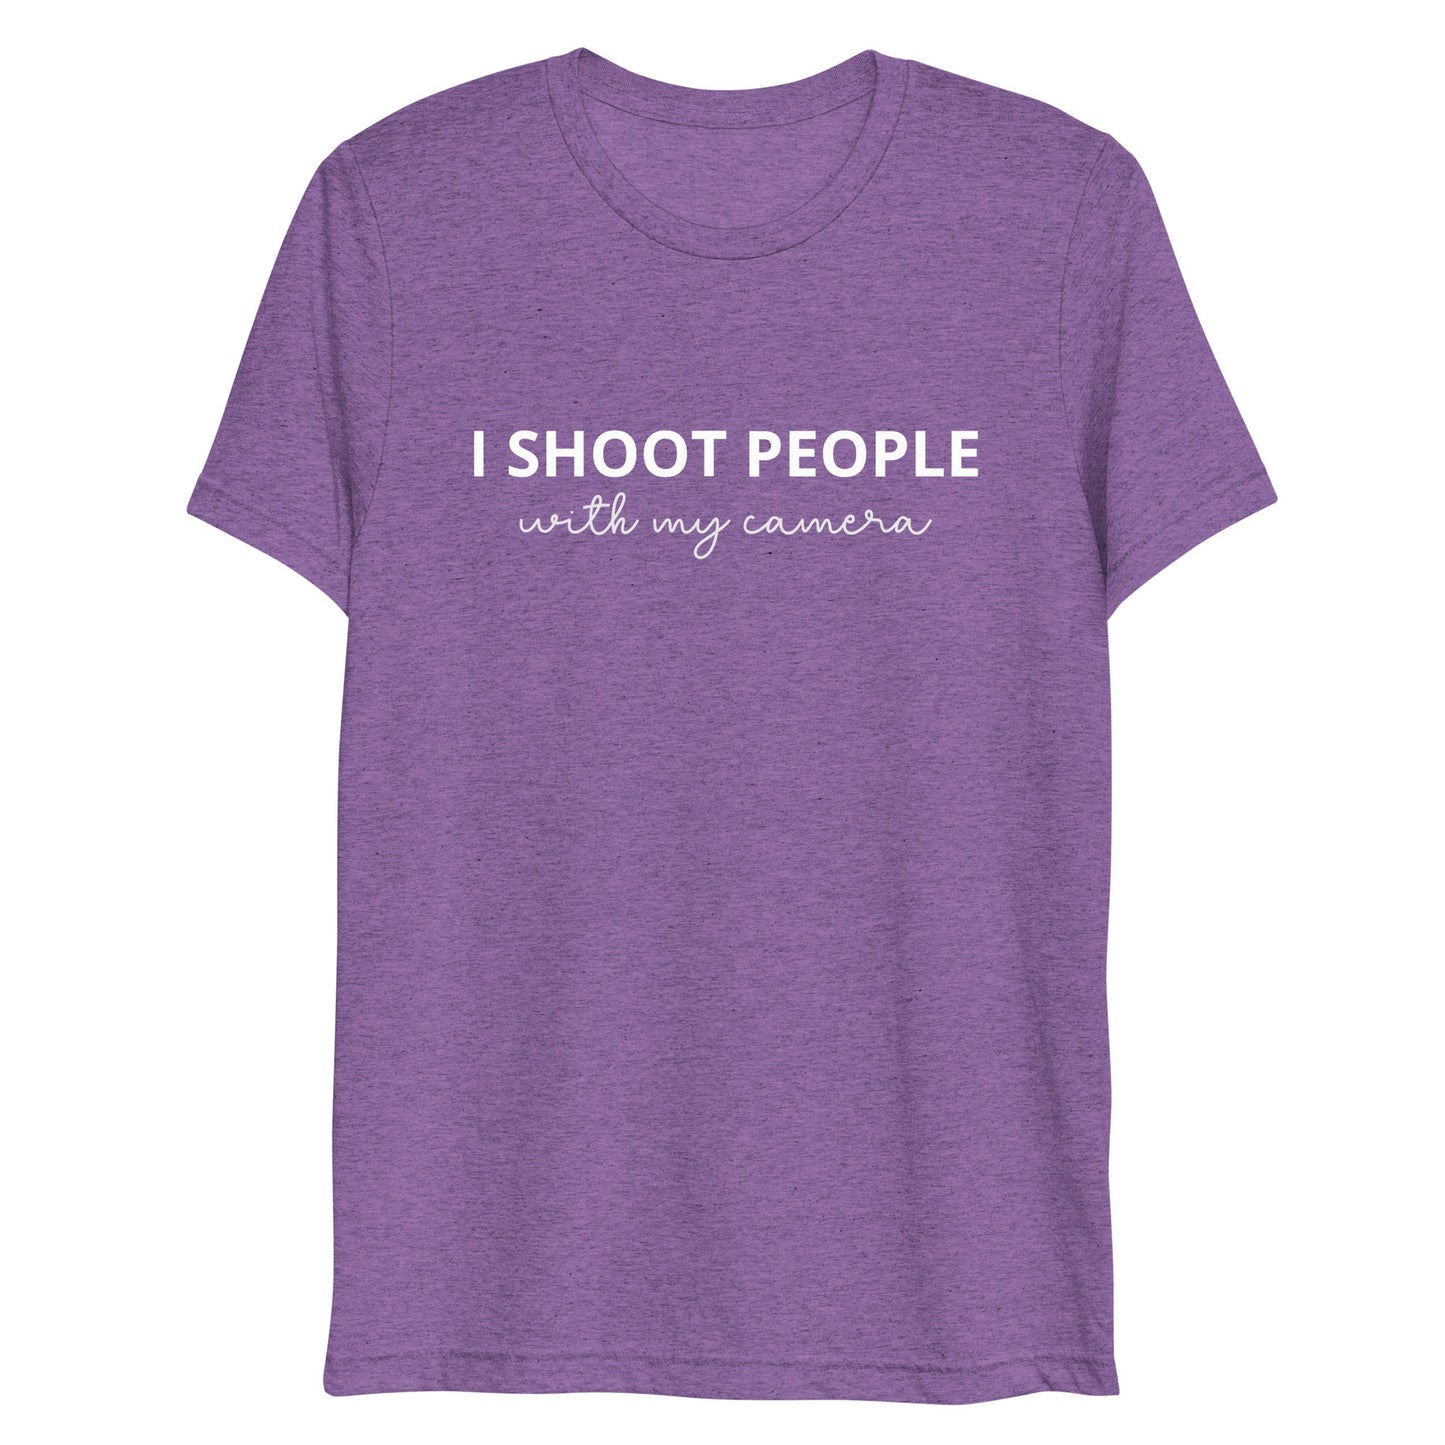 I Shoot People With My Camera T-Shirt,Photographer Shirt,Photography Gift,Studio Gifts,Photography Love Shirt,Photographer Life, Hobby Shirt, Short sleeve t-shirt - ShopJeanPhotography.com